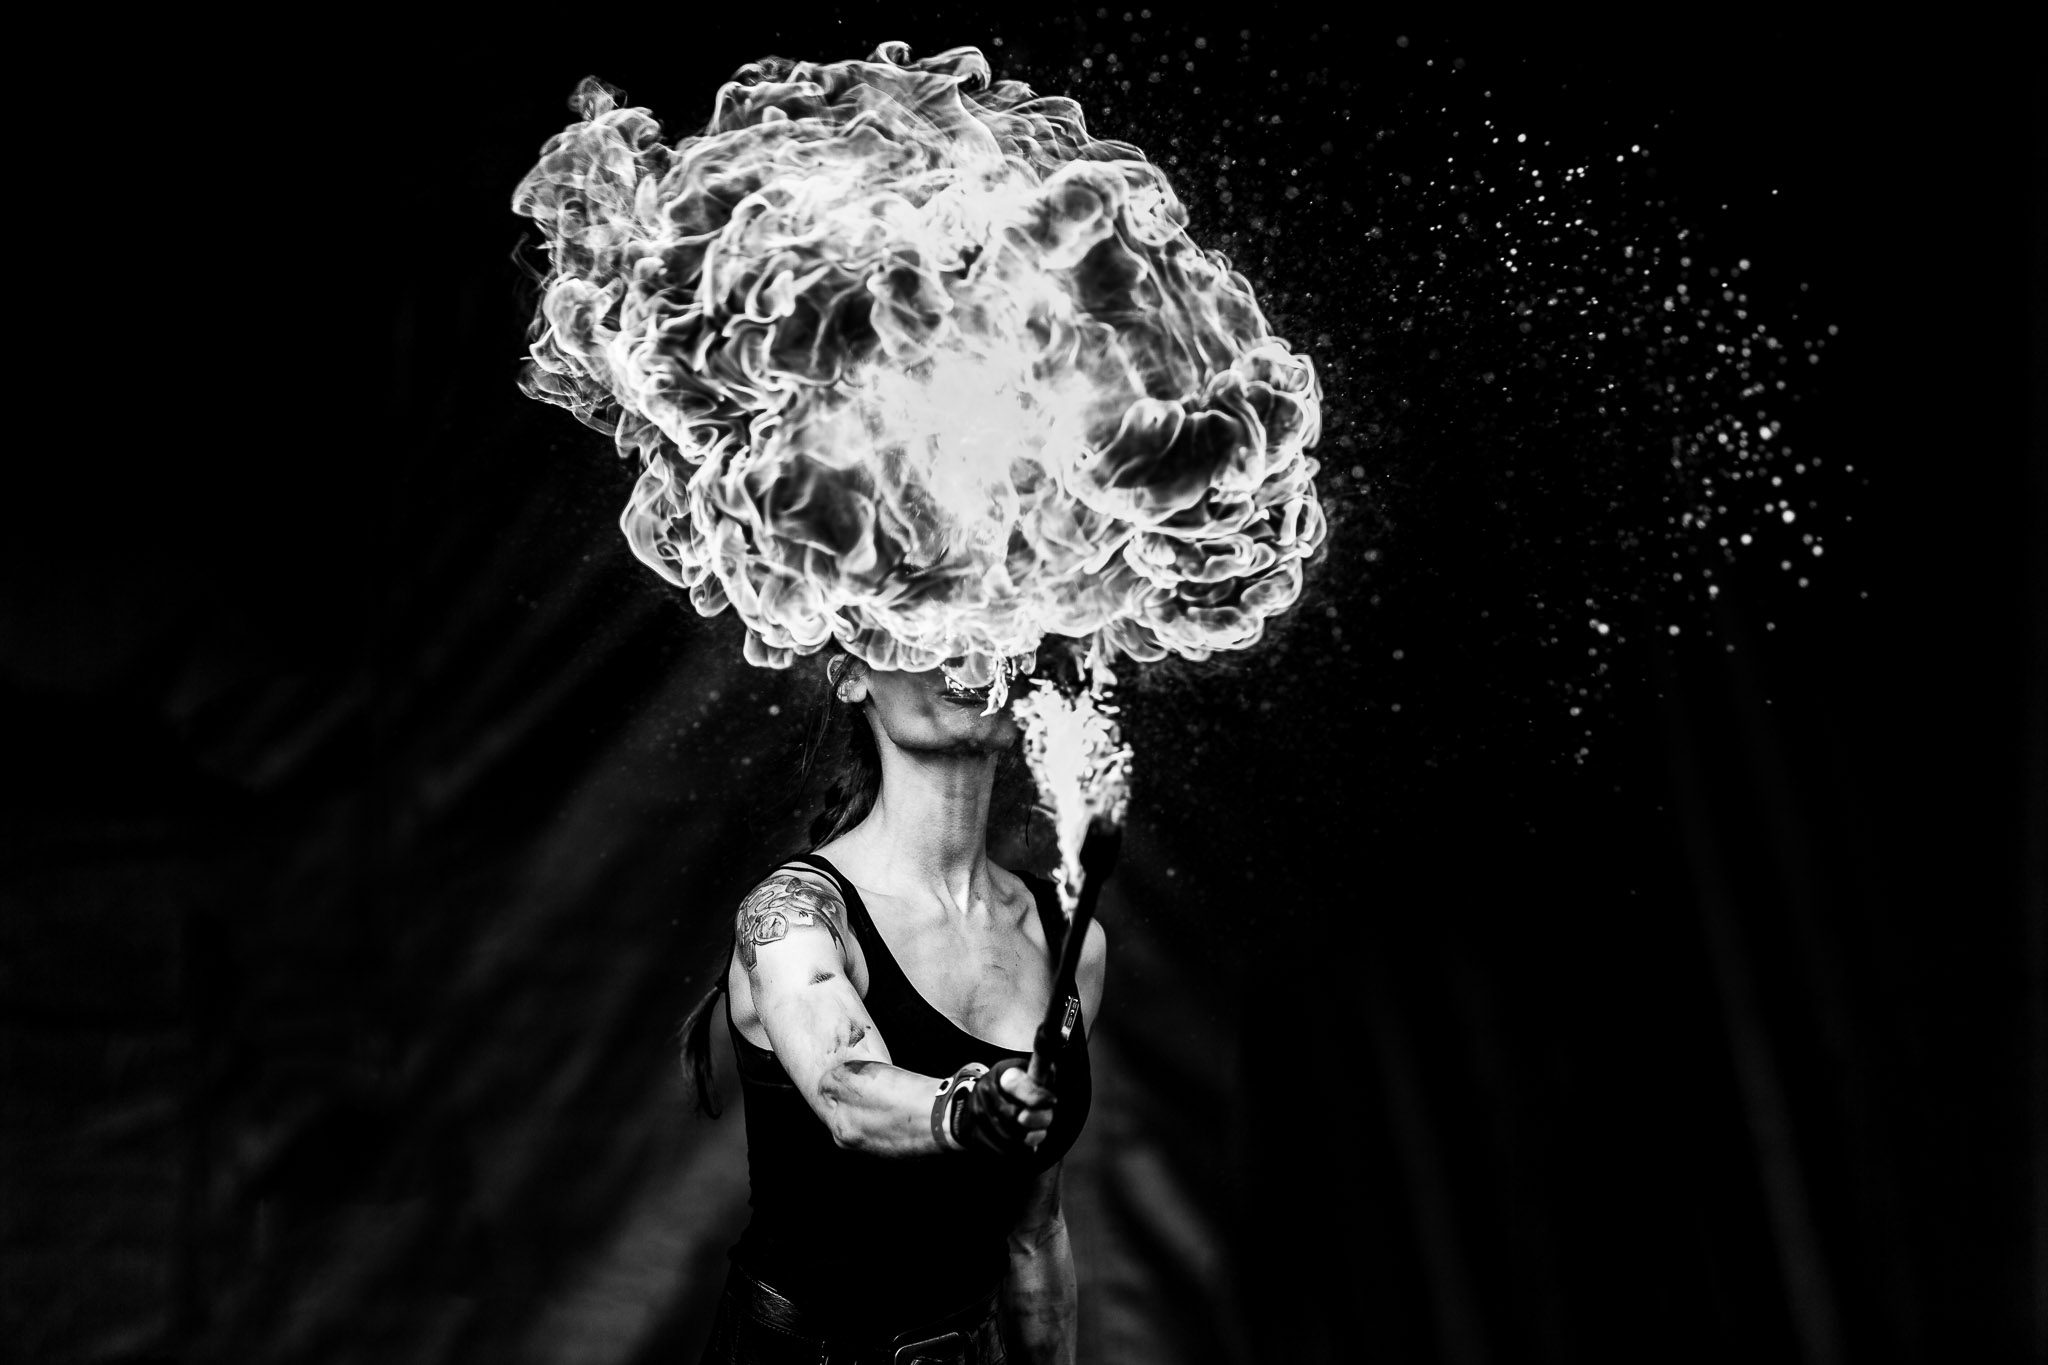 Fire Breathing Black & White Photography